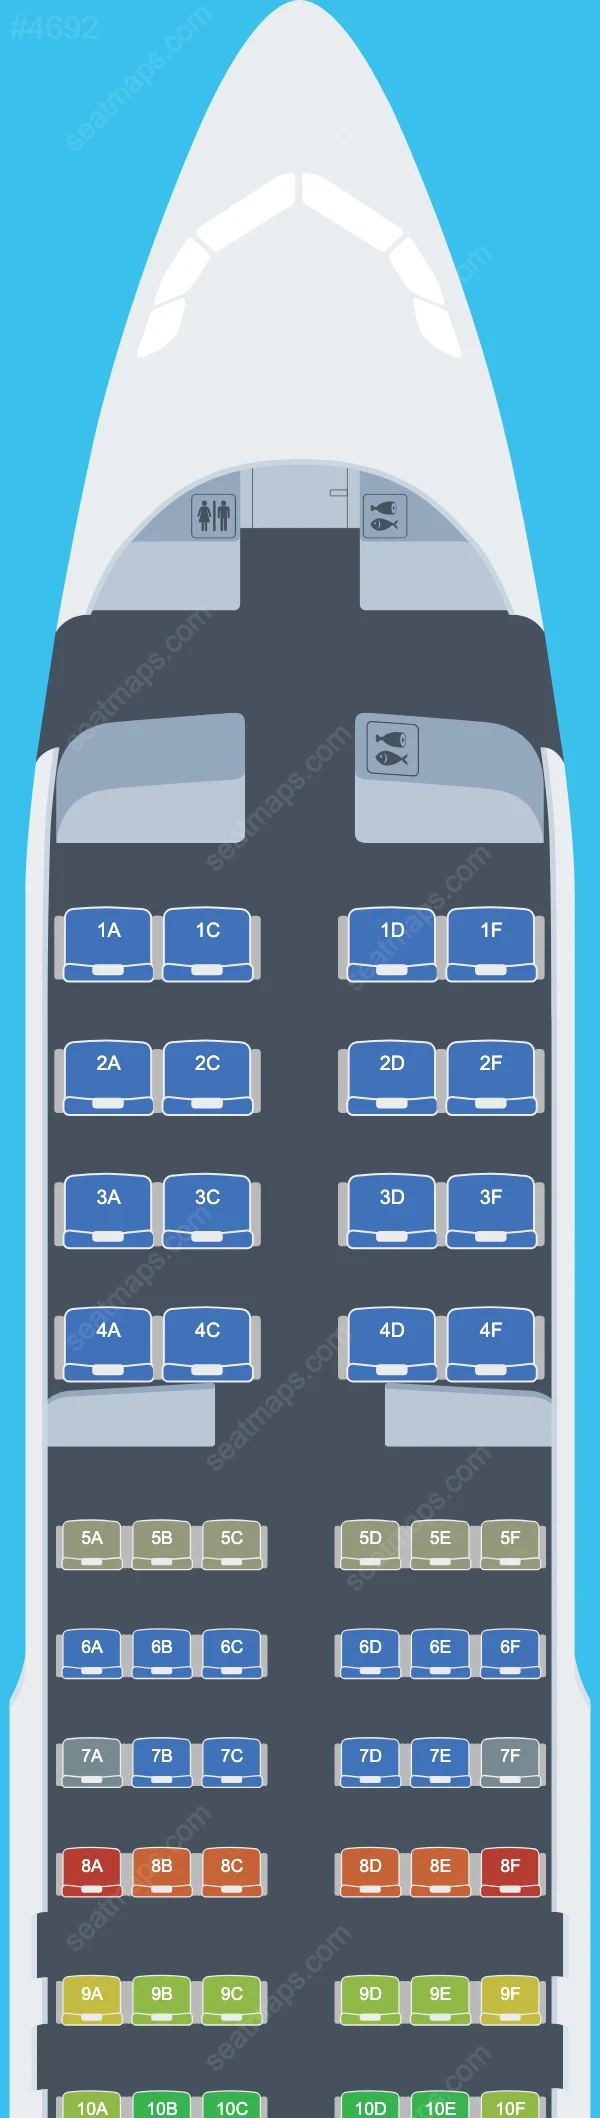 Lao Airlines Airbus A320 Seat Maps A320-200 V.2